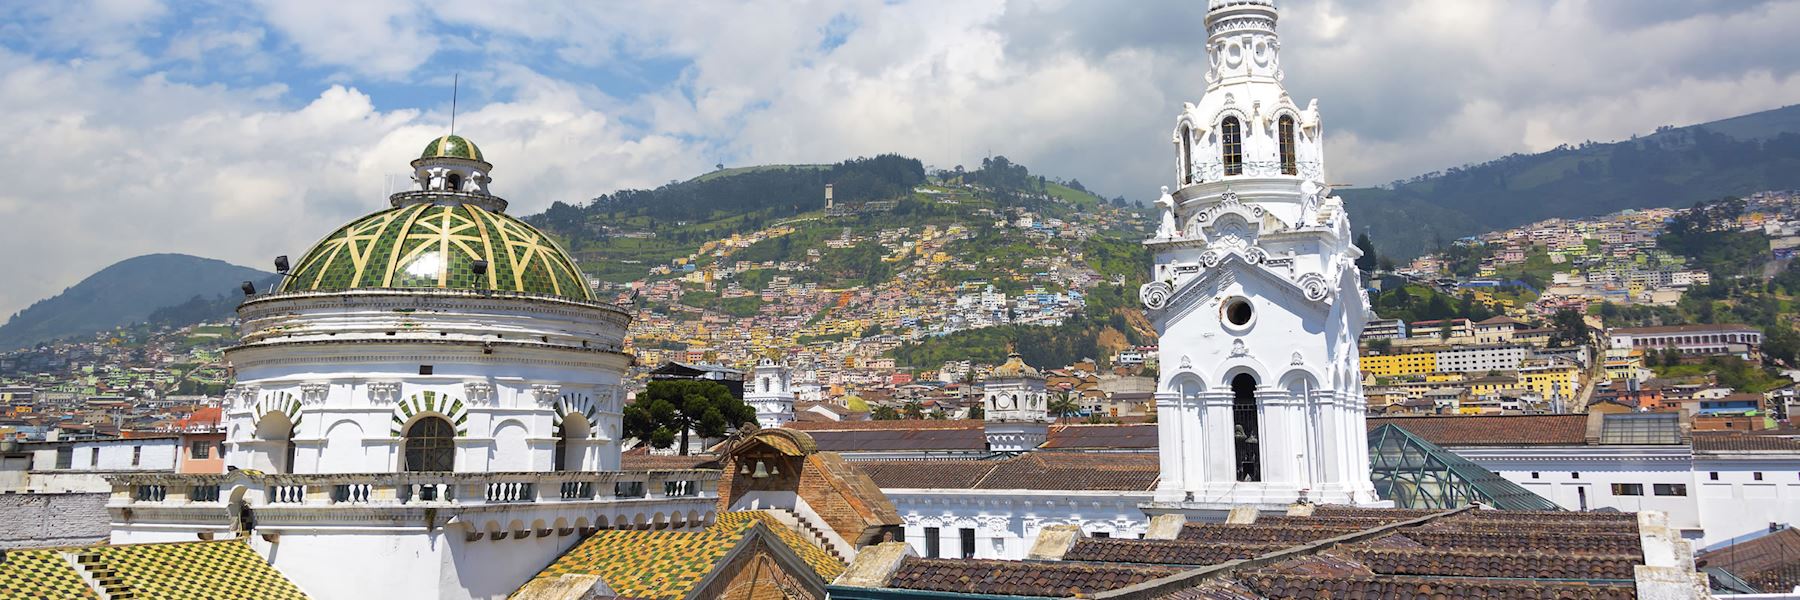 Places to visit in Ecuador | Audley Travel